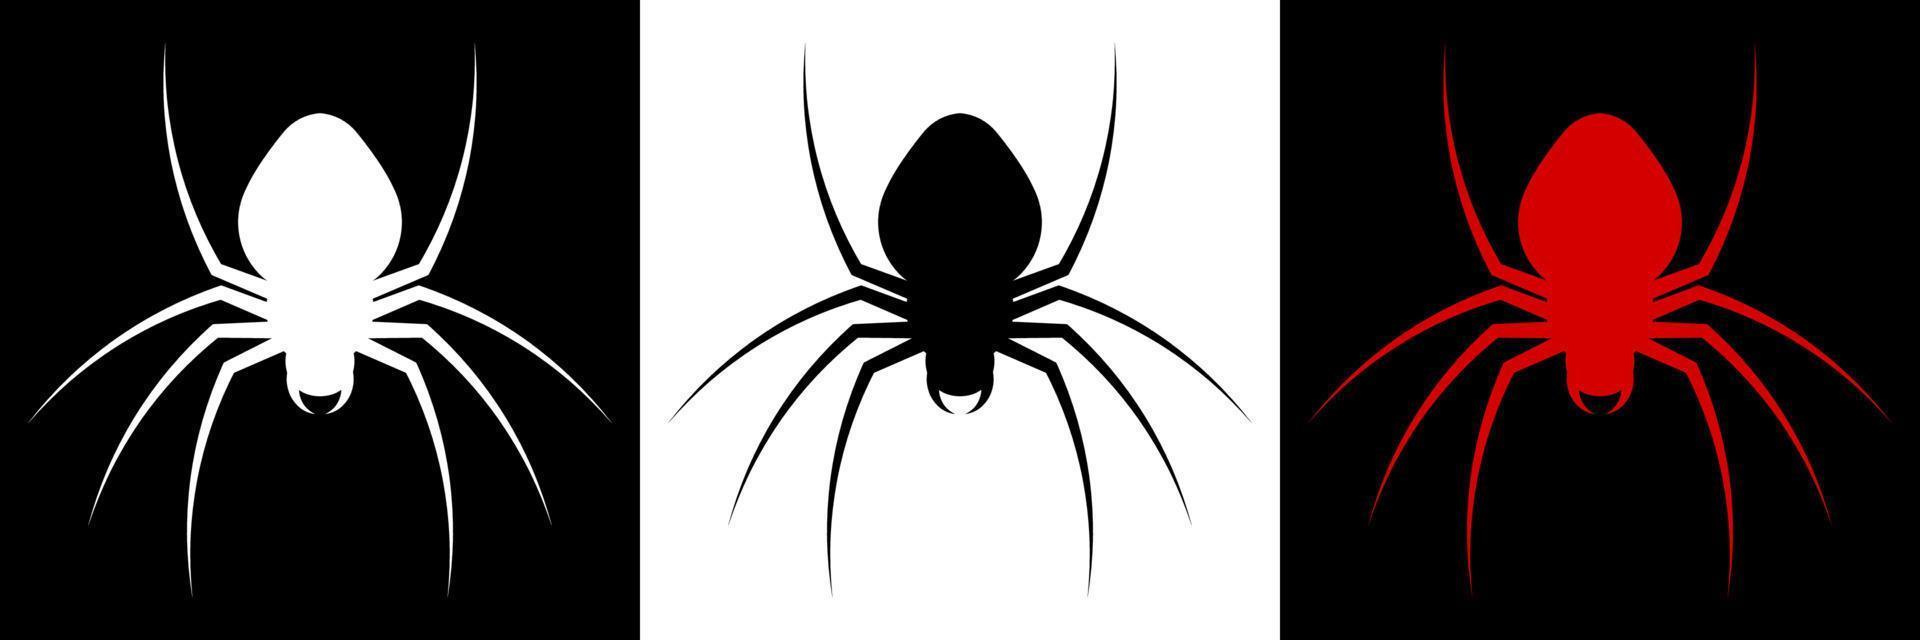 spider icon for Halloween web banner decoration. Dangerous poisonous insects. Disease carriers. A ruthless hunter. Minimalistic vector